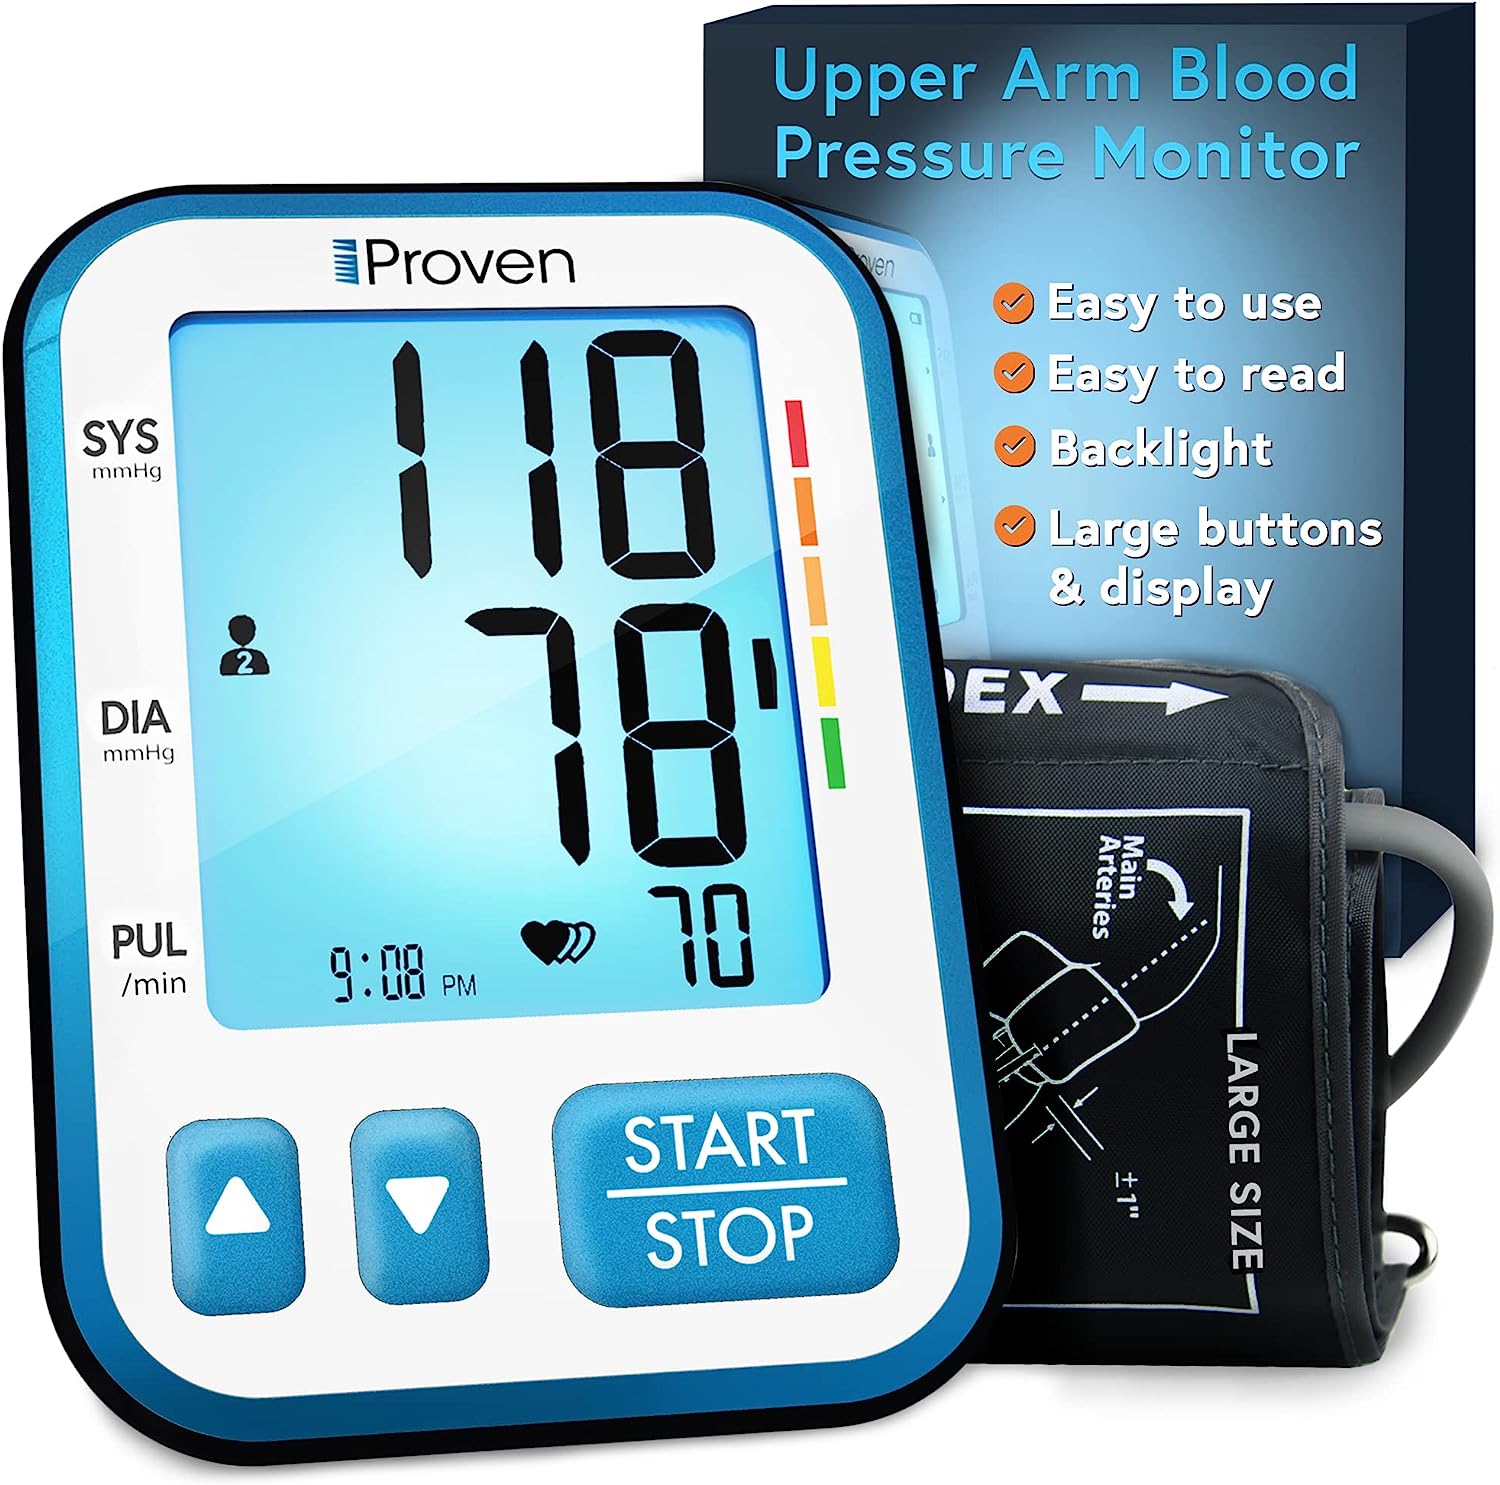 IPROVEN Upper Arm Blood Pressure Cuff, Easy to Use, [...]